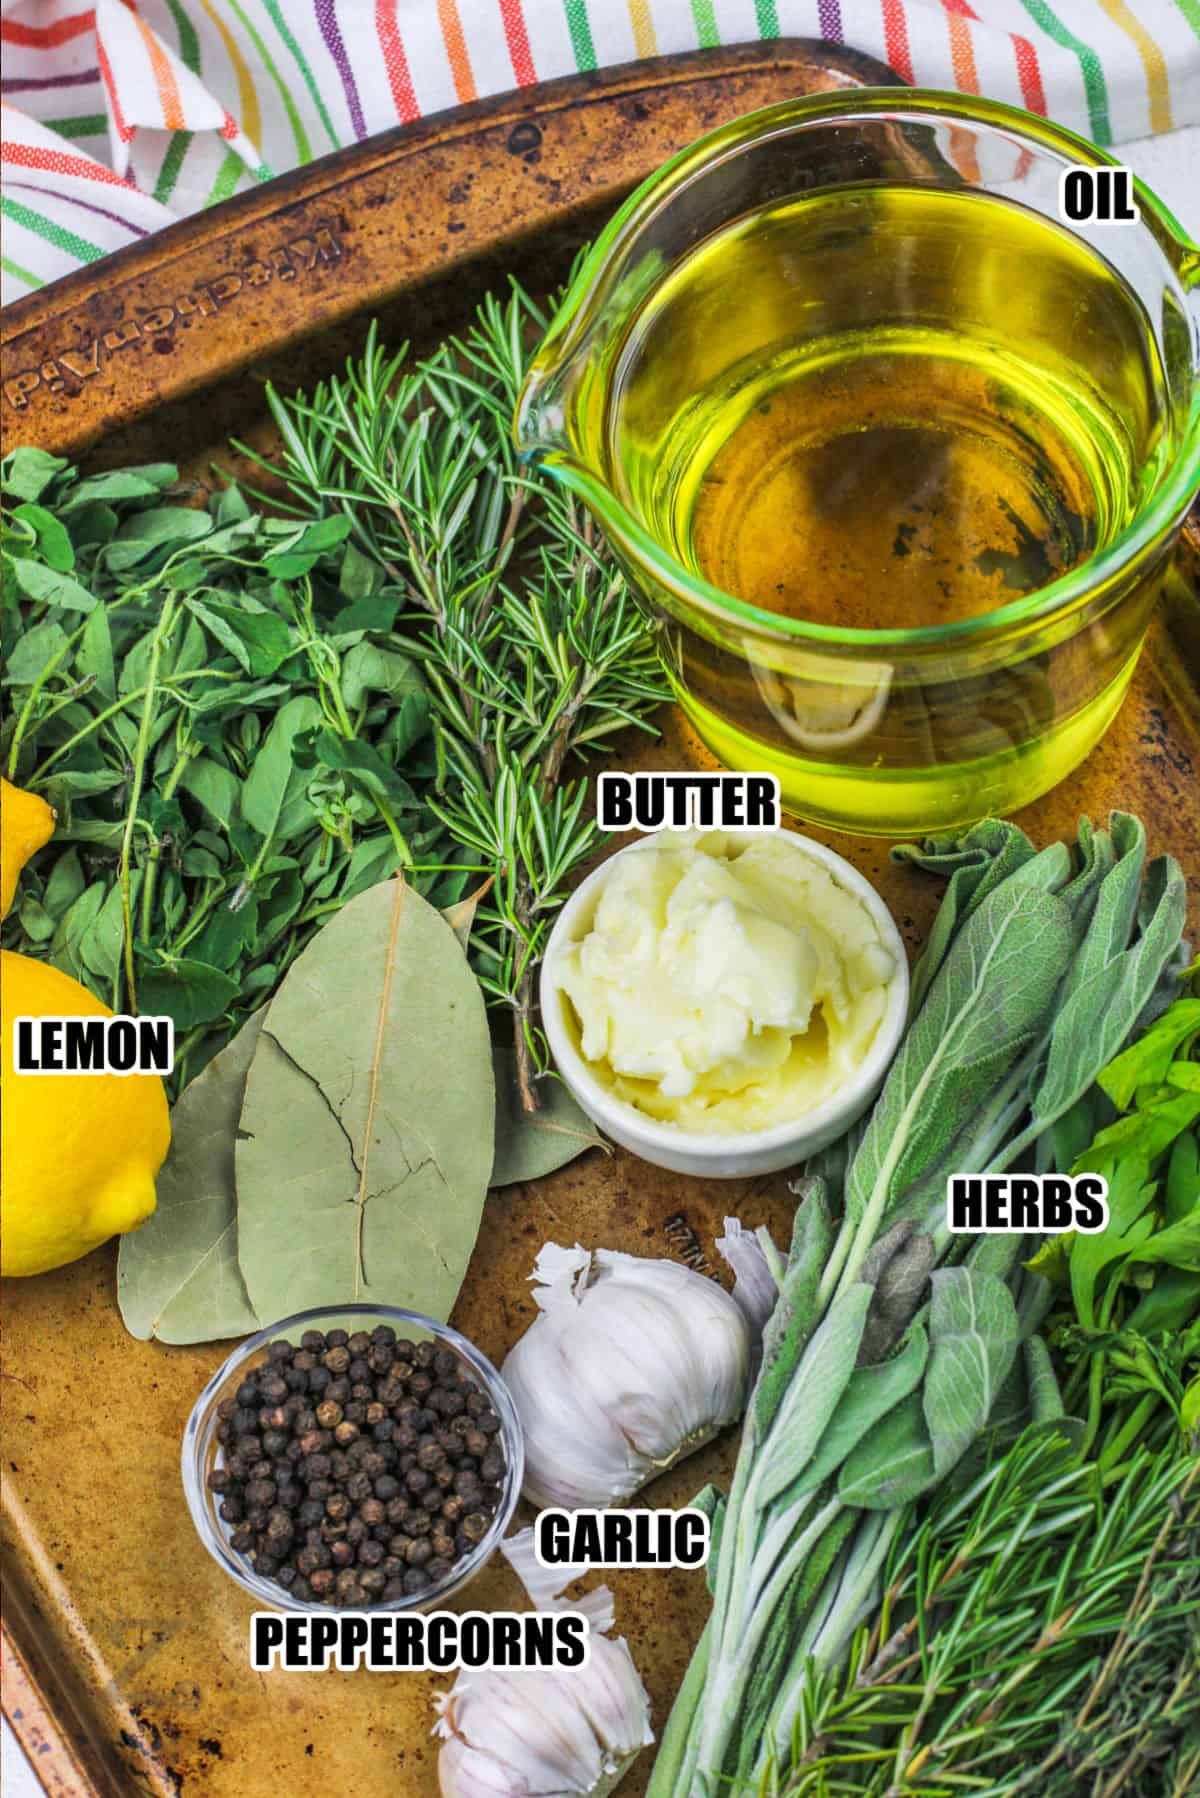 oil butter lemon , herbs garlic and peppercorns with labels to make Herb Infused Olive Oil